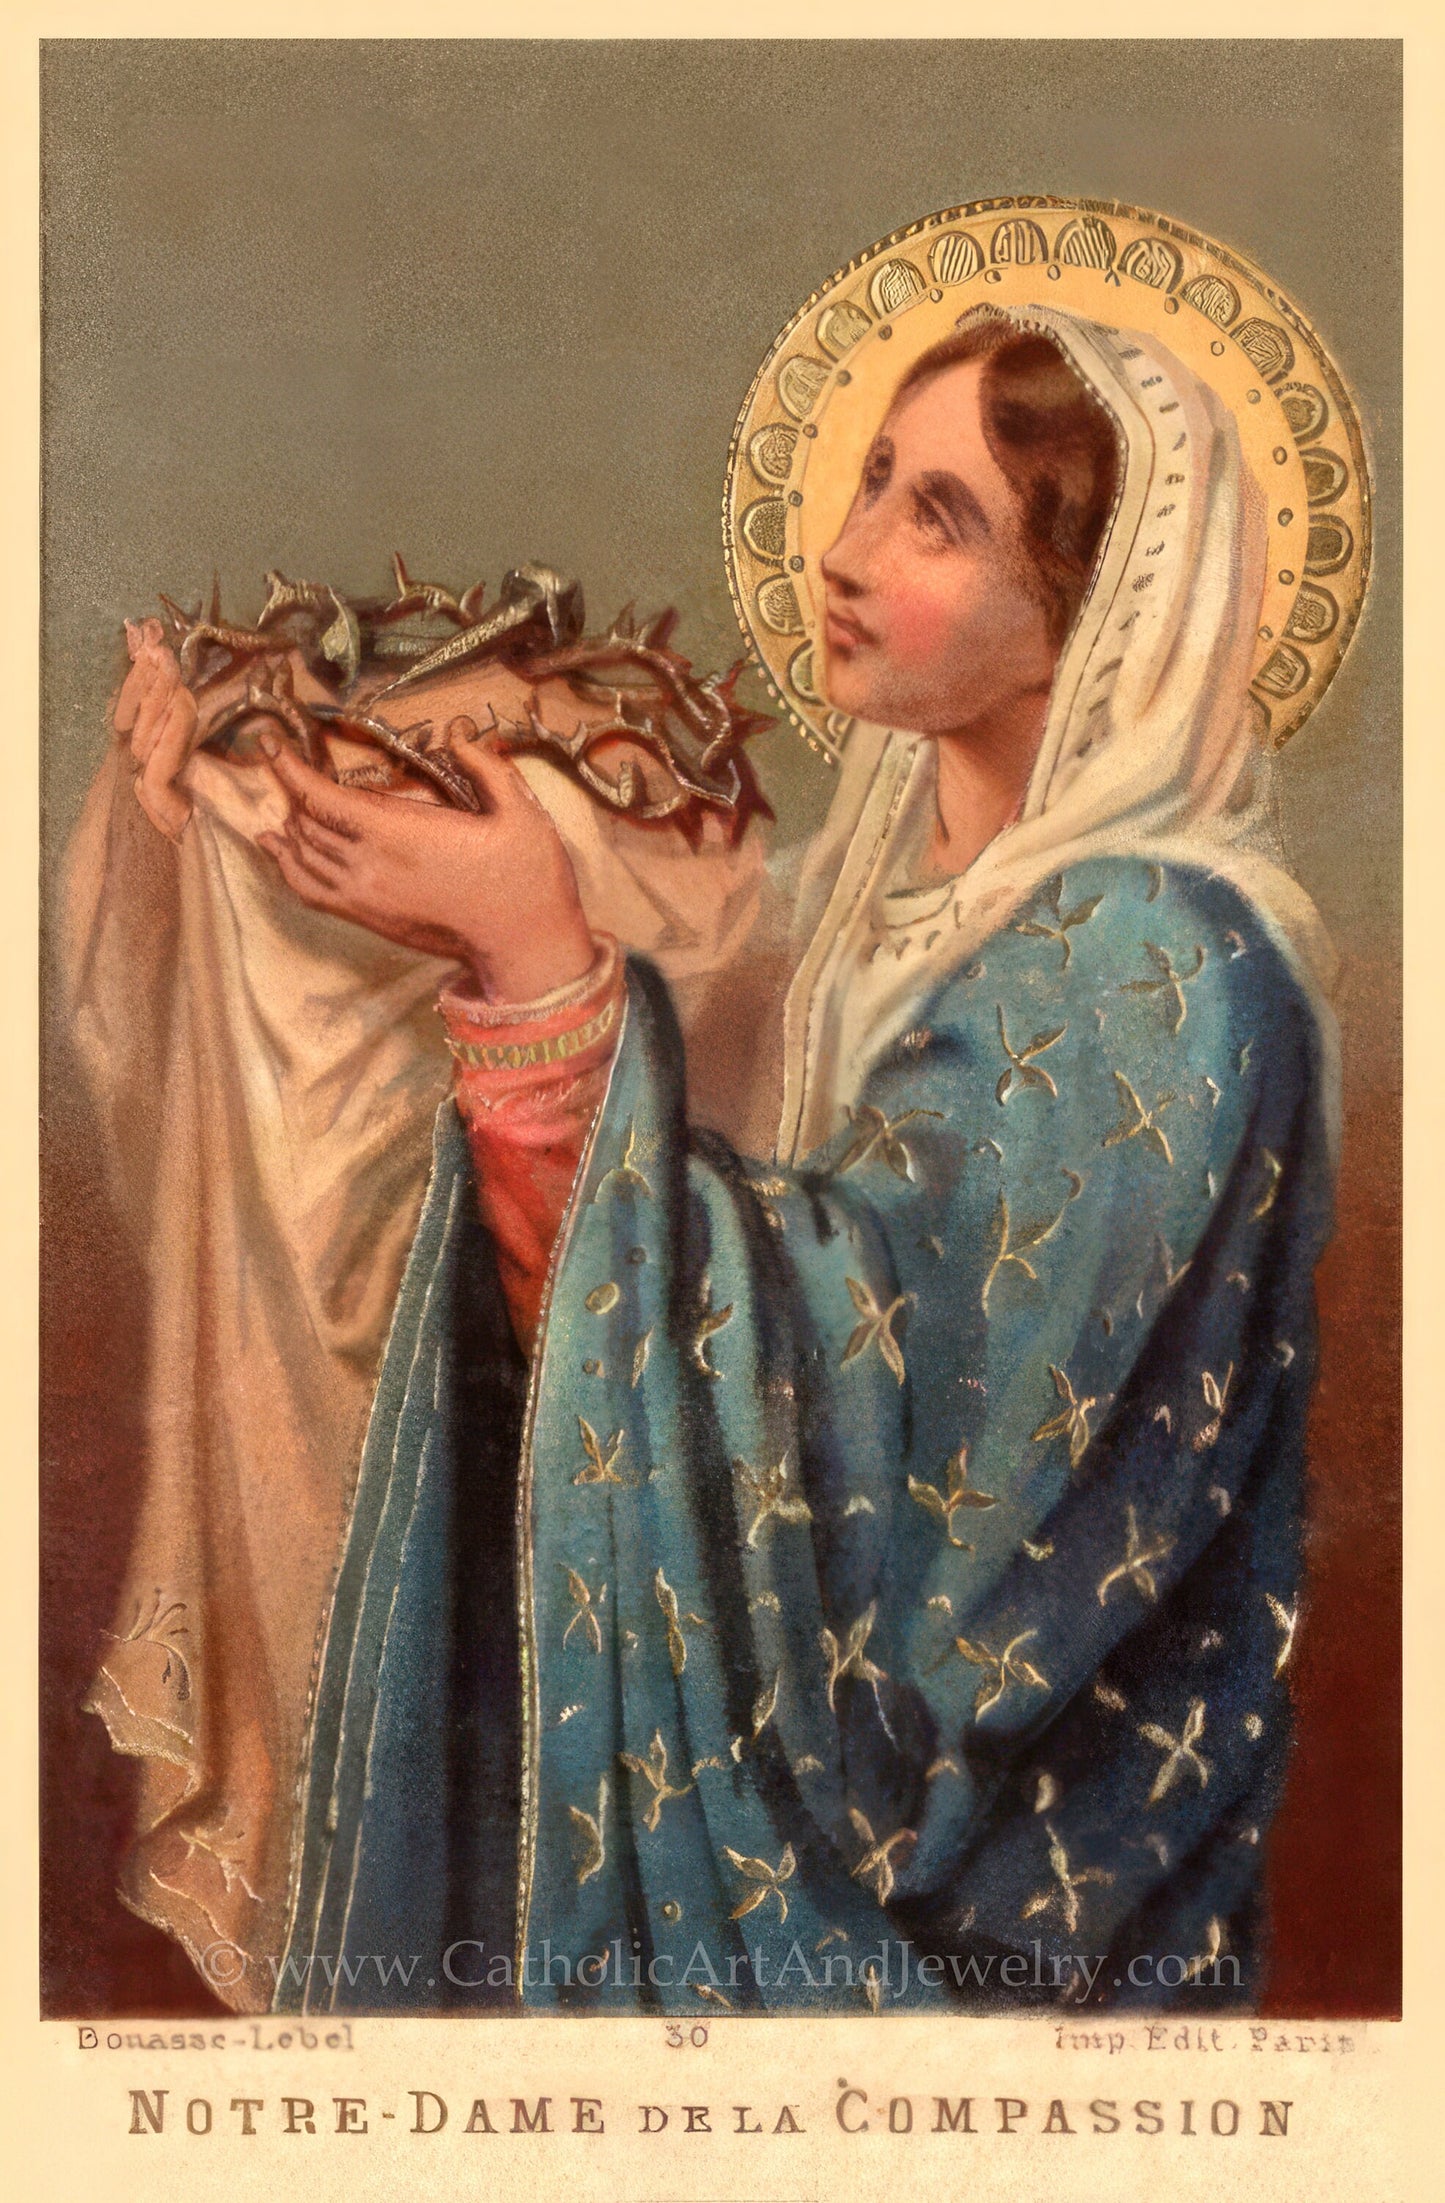 New! Holy Card – Our Lady of the Compassion – pack of 10/100/1000 – Restored Vintage Holy Card